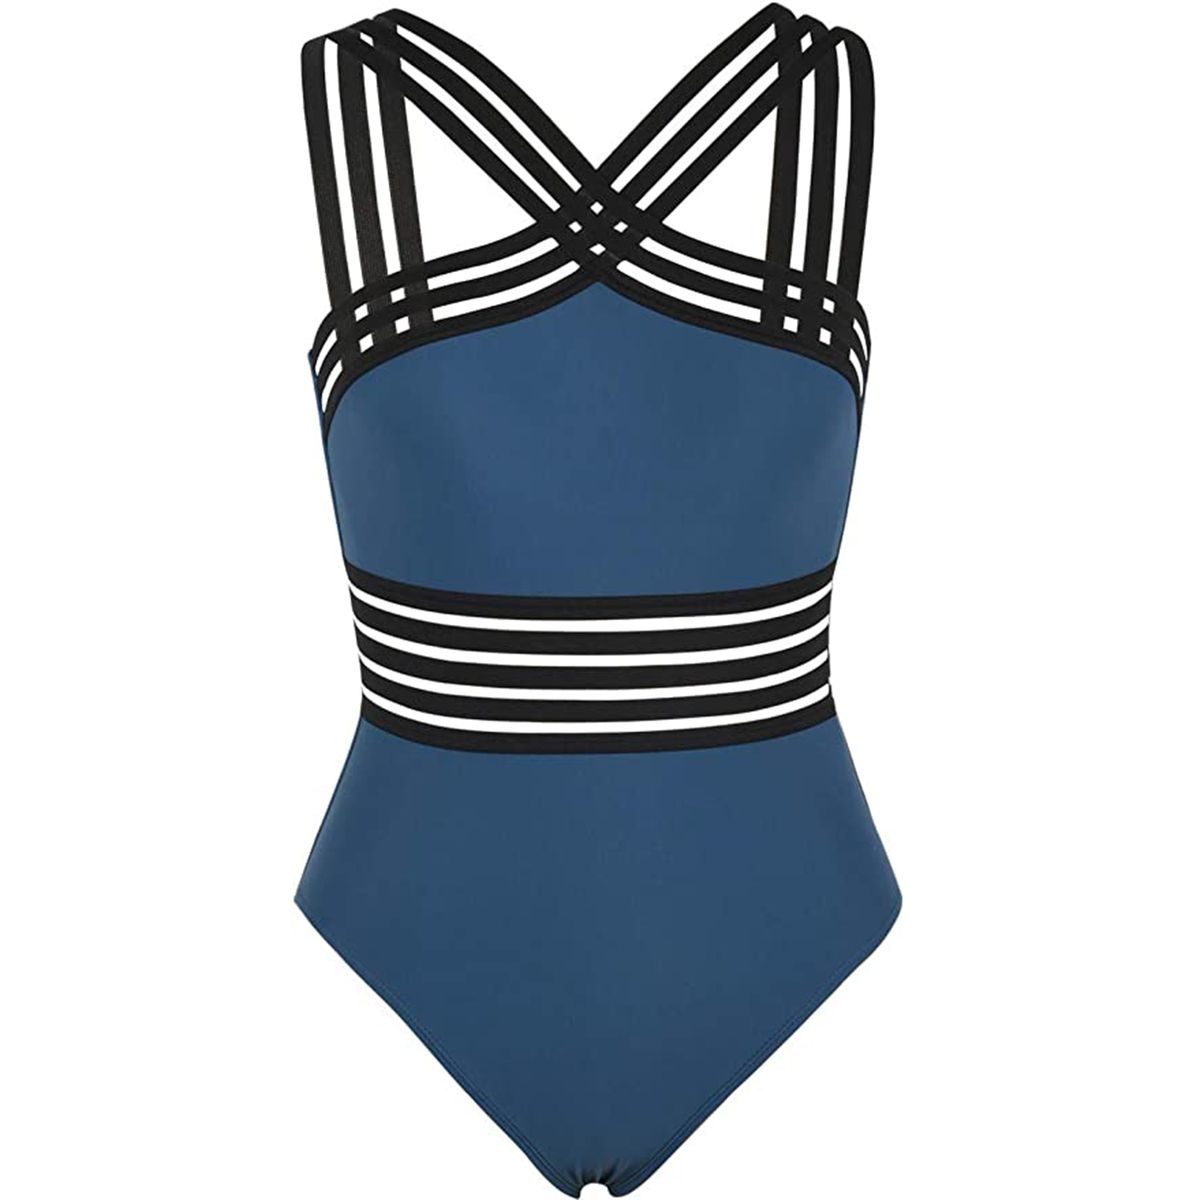 Full-coverage swimsuits